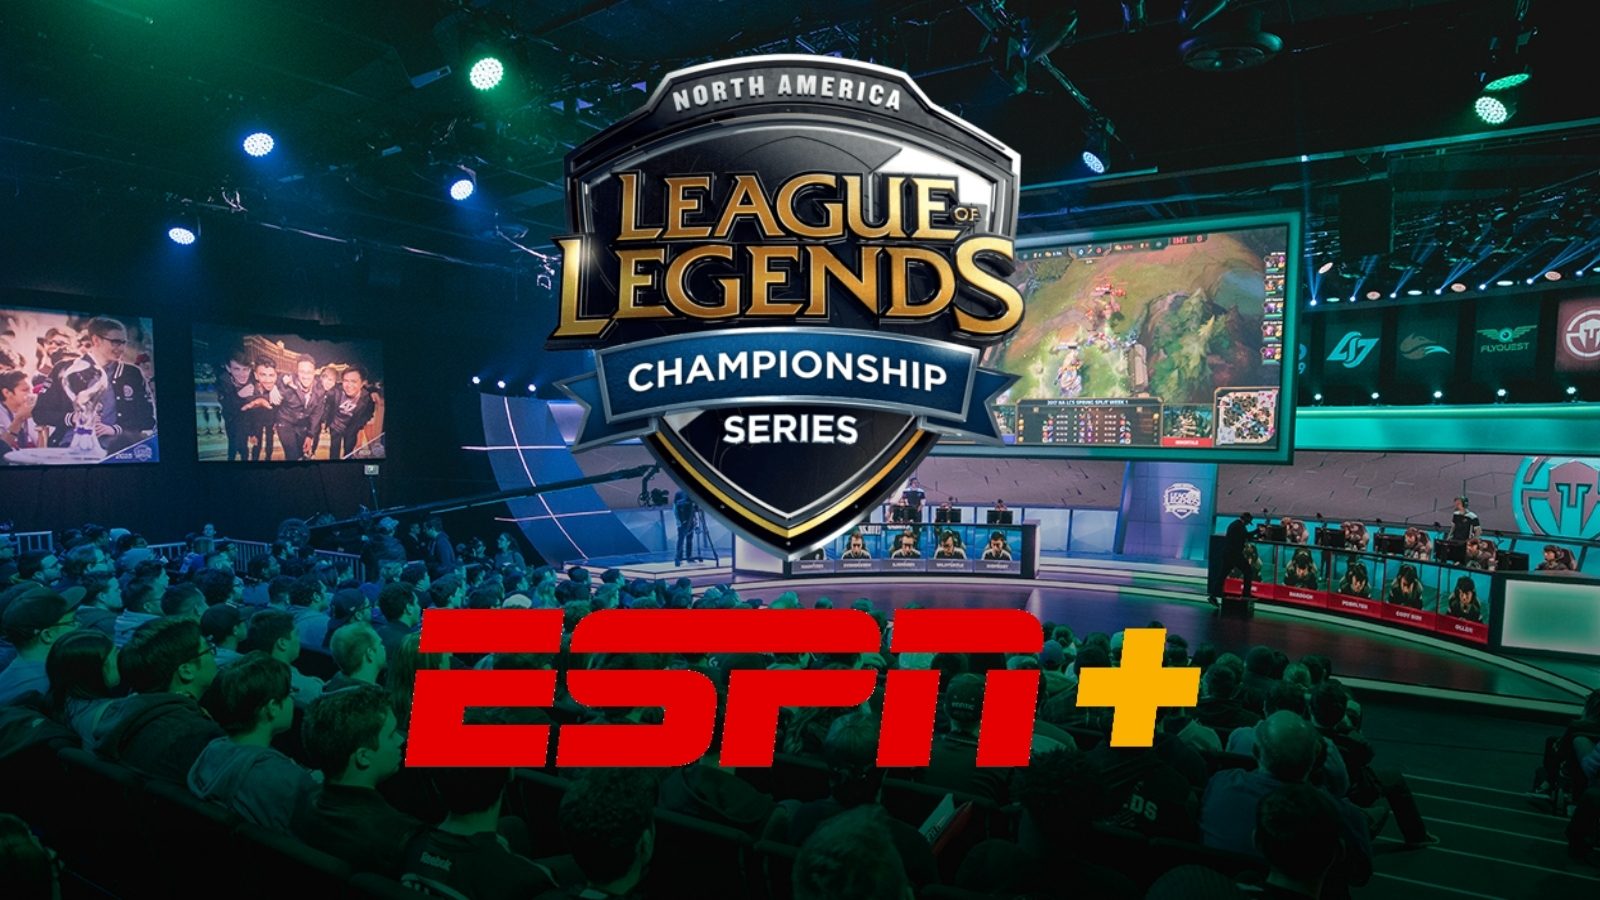 League of Legends is Coming to ESPN as Deal Struck with NA LCS